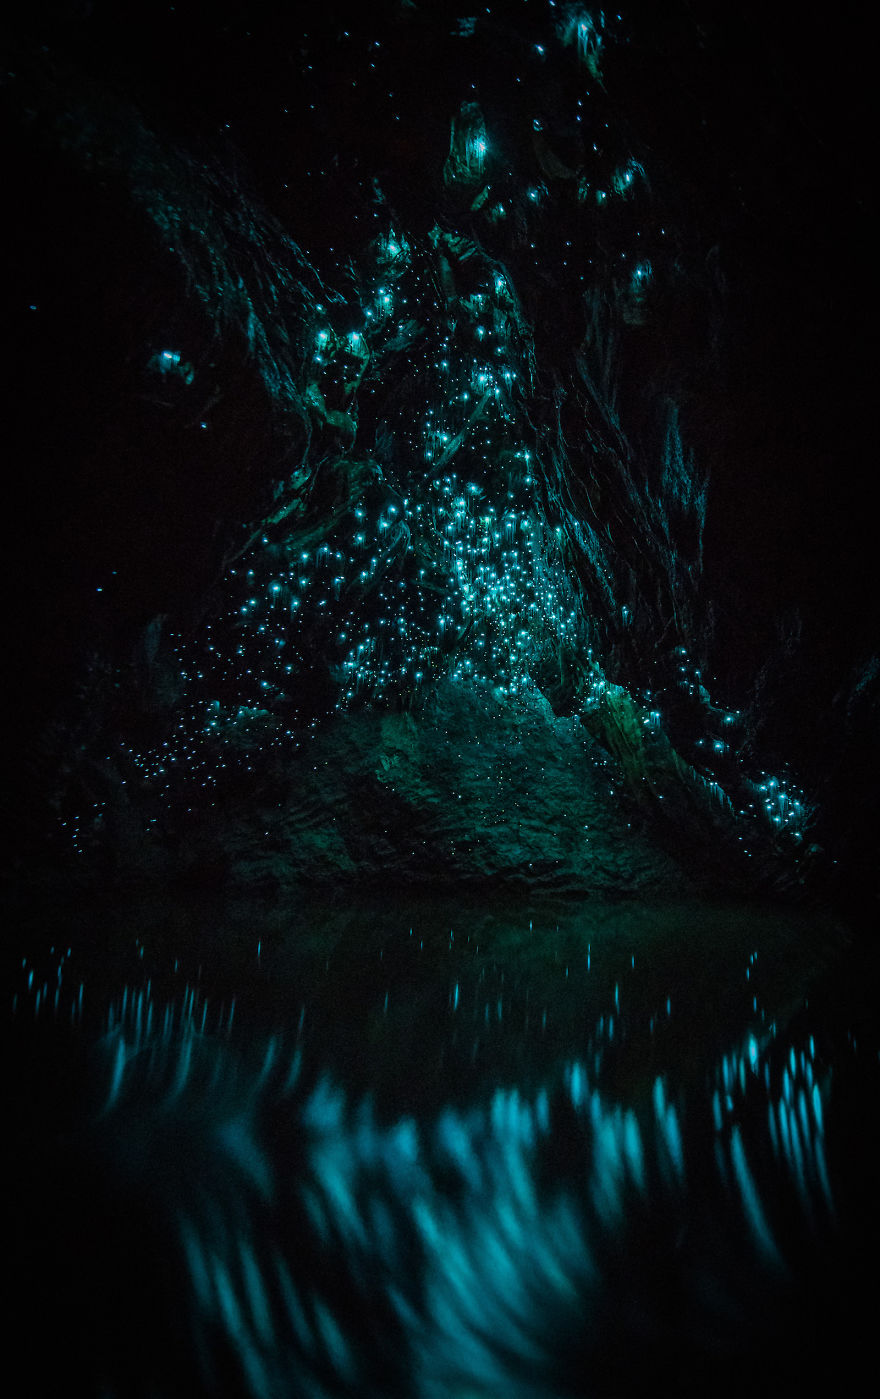 Northland-Caves-Glowworms-SJP-17-5a332ab030620__880